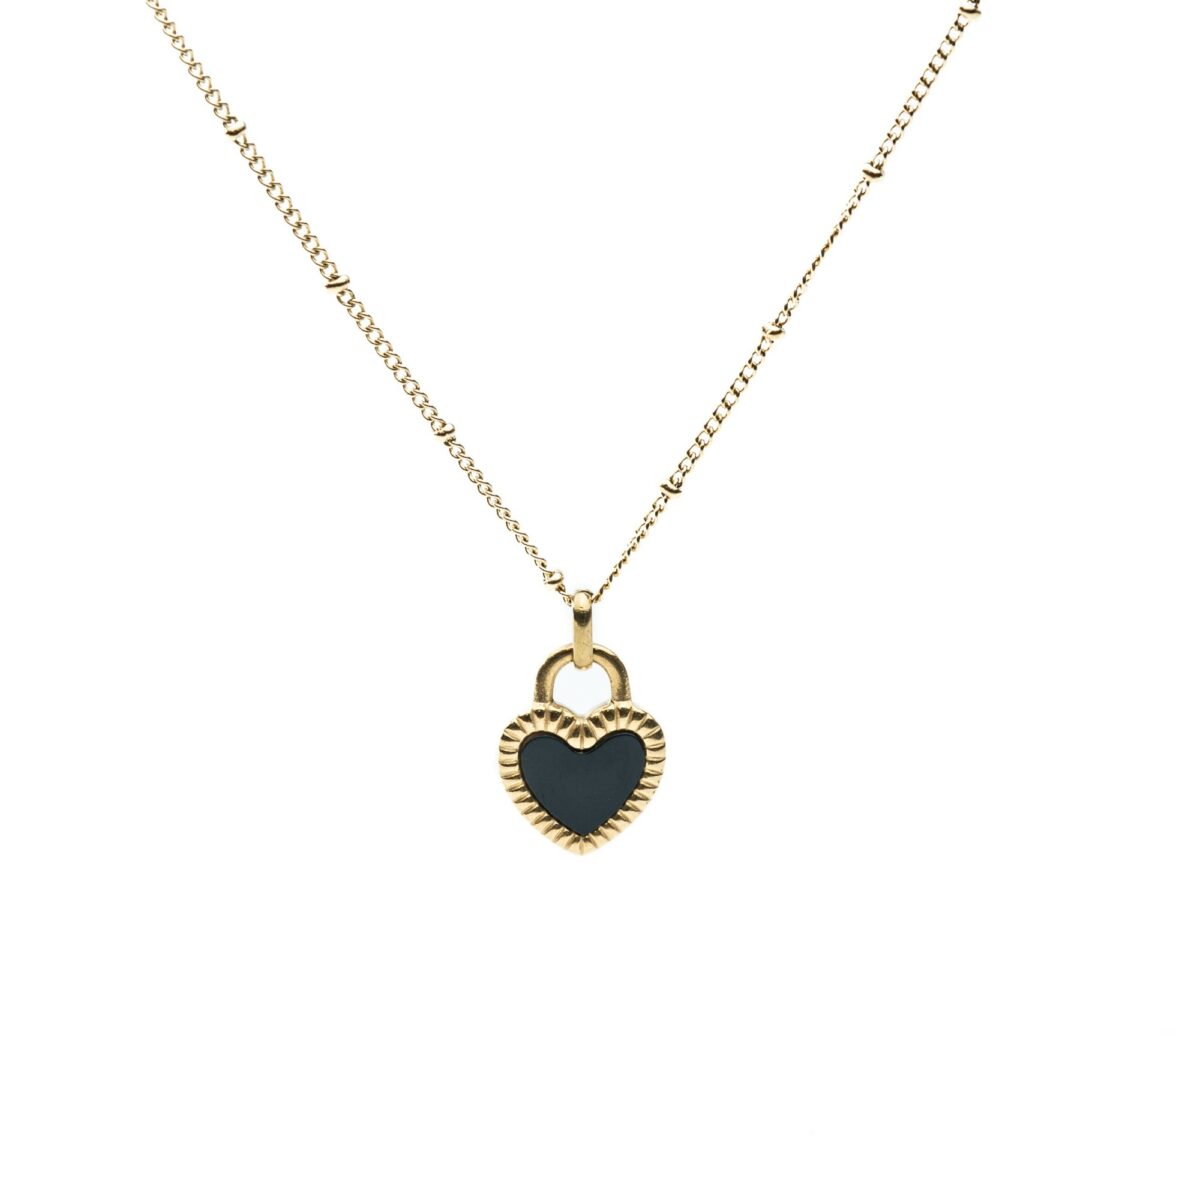 https://m.clubbella.co/product/2-way-heart-tag-necklace/ DSC00048